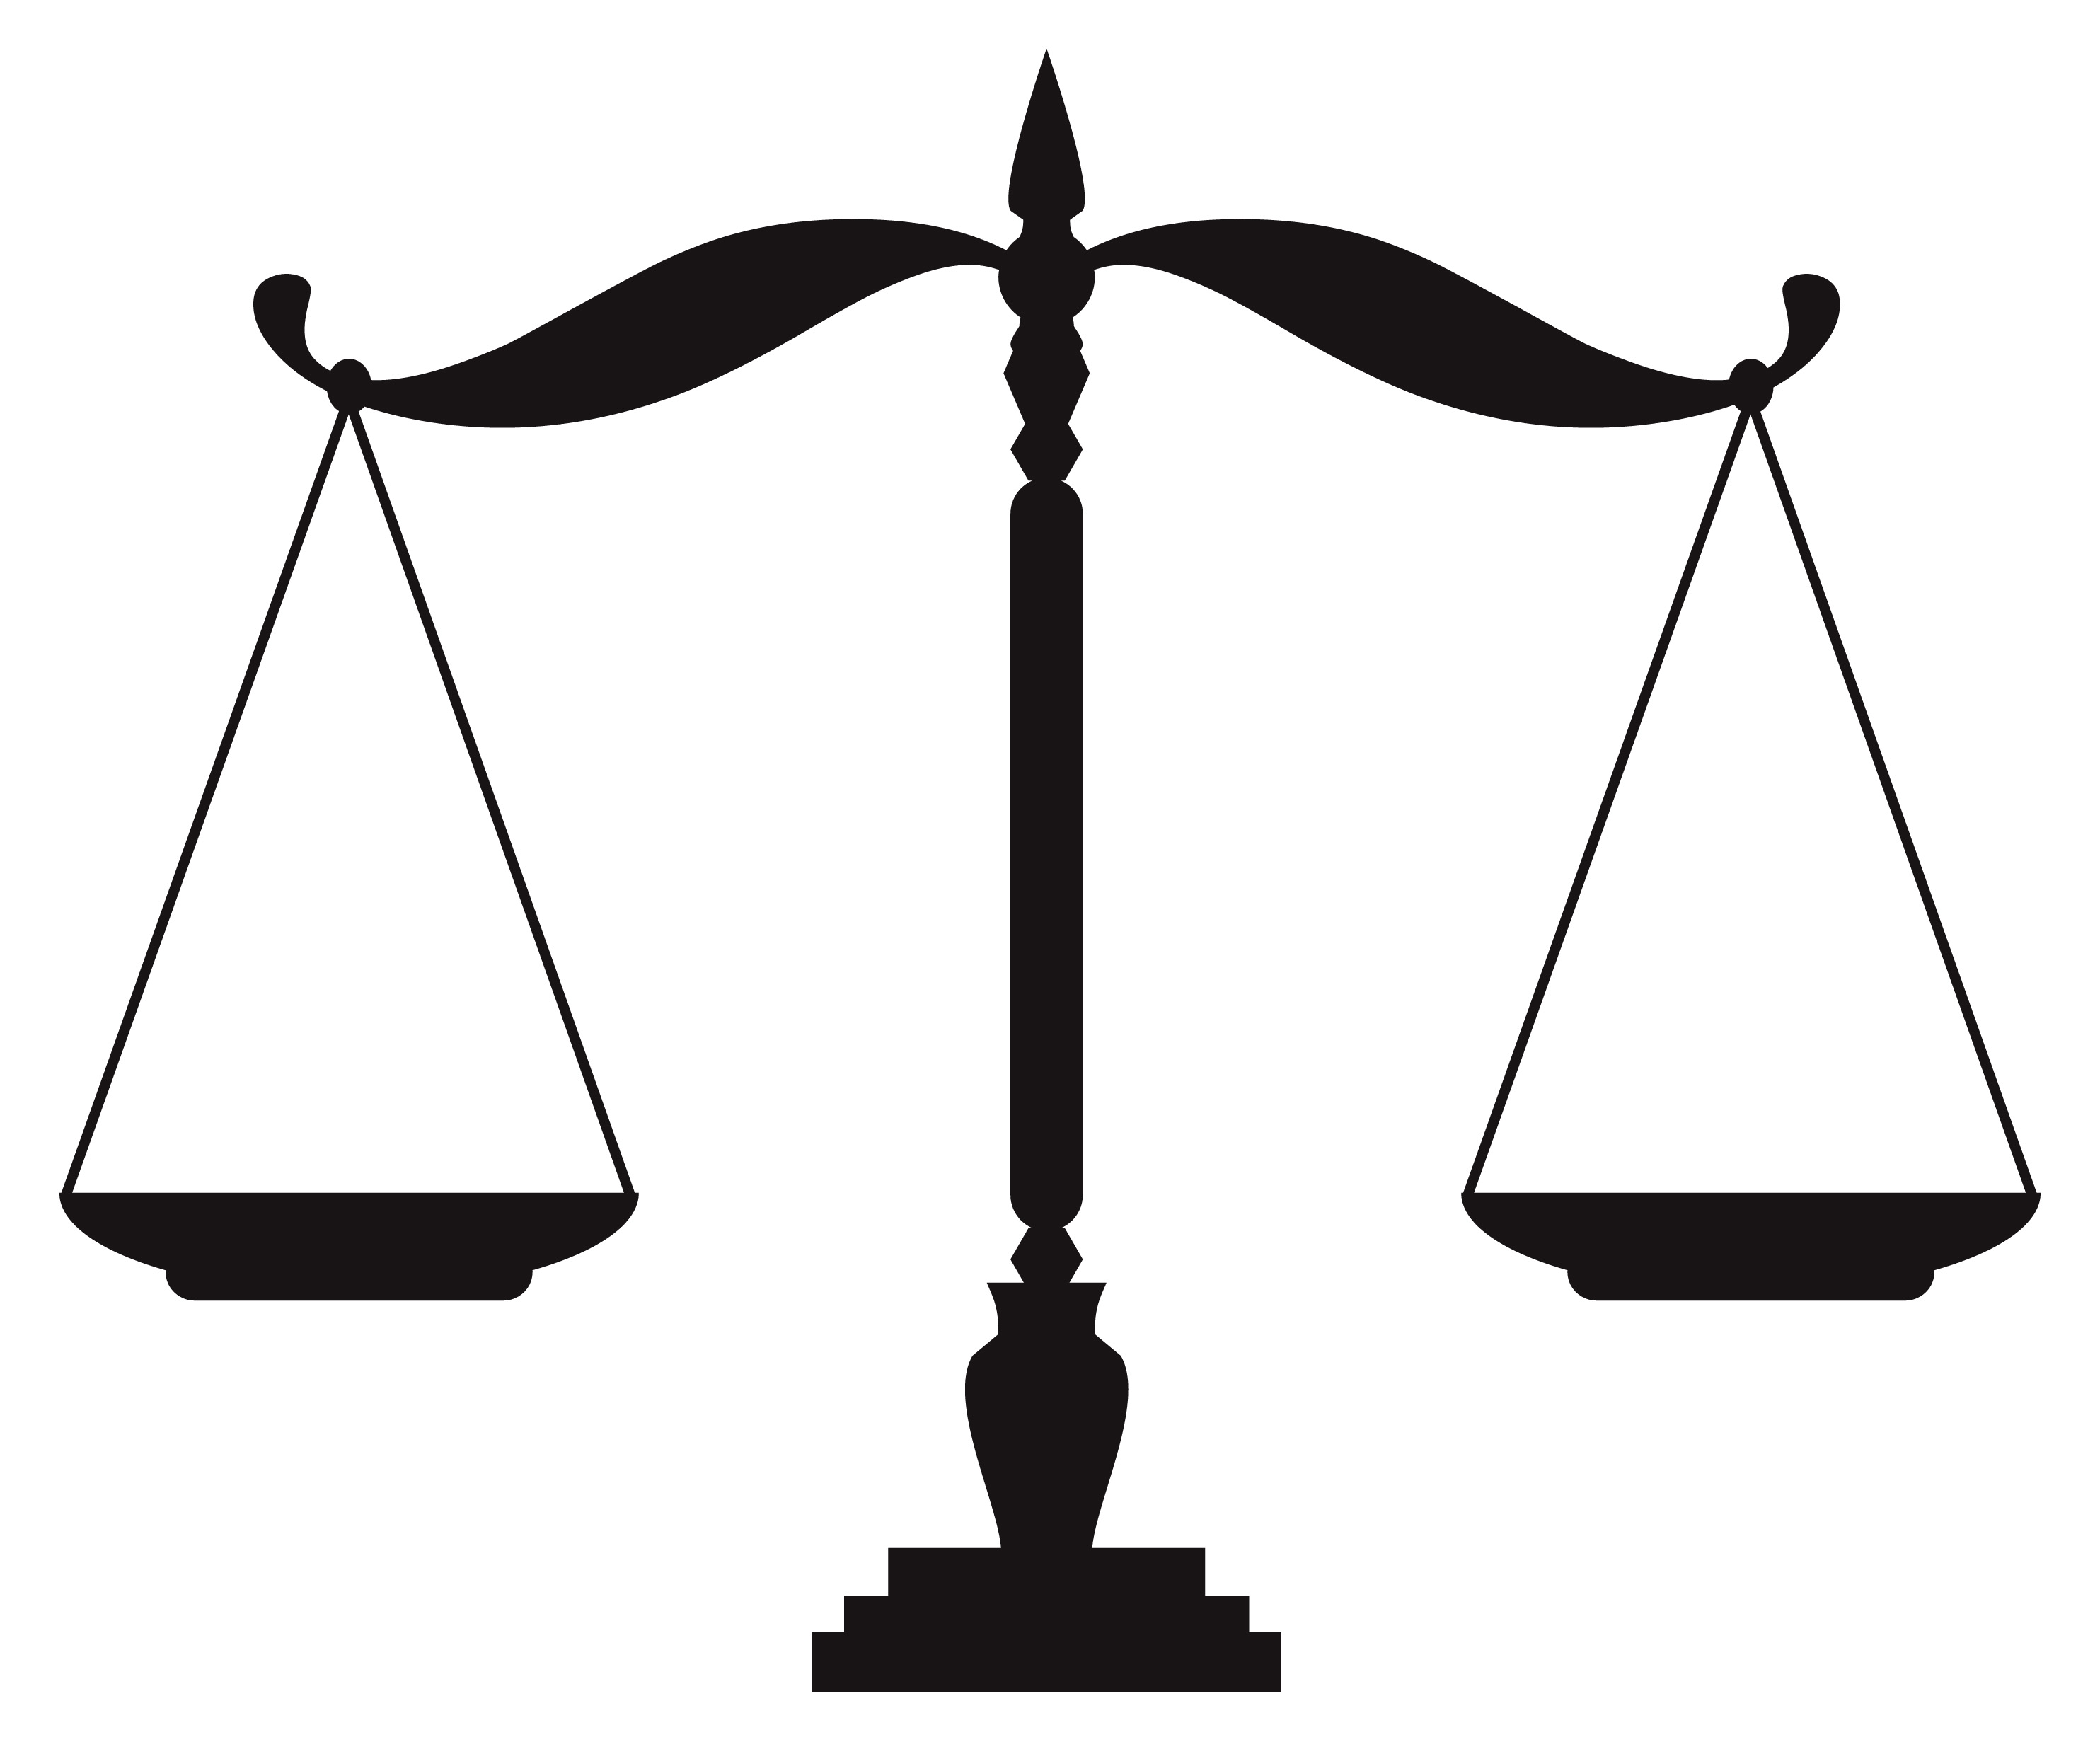 scales of justice clip art free download - photo #31